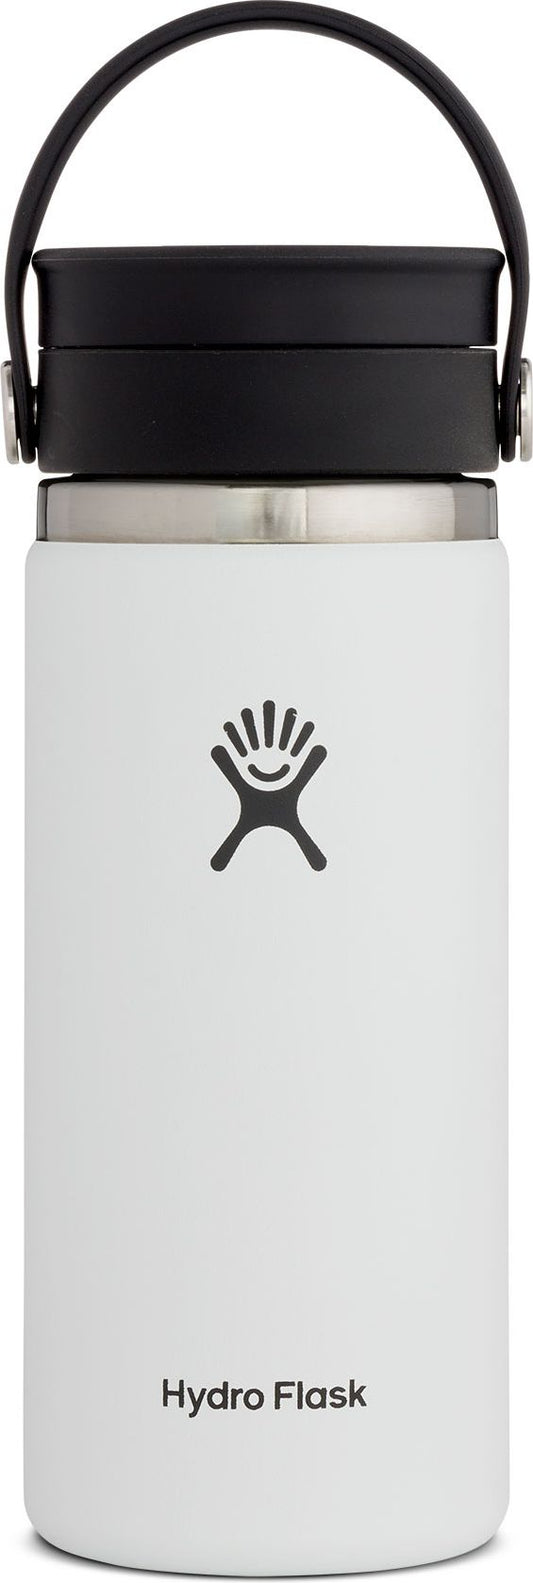 Hydro Flask Accessories 16oz Wide Mouth Flexible Sip White